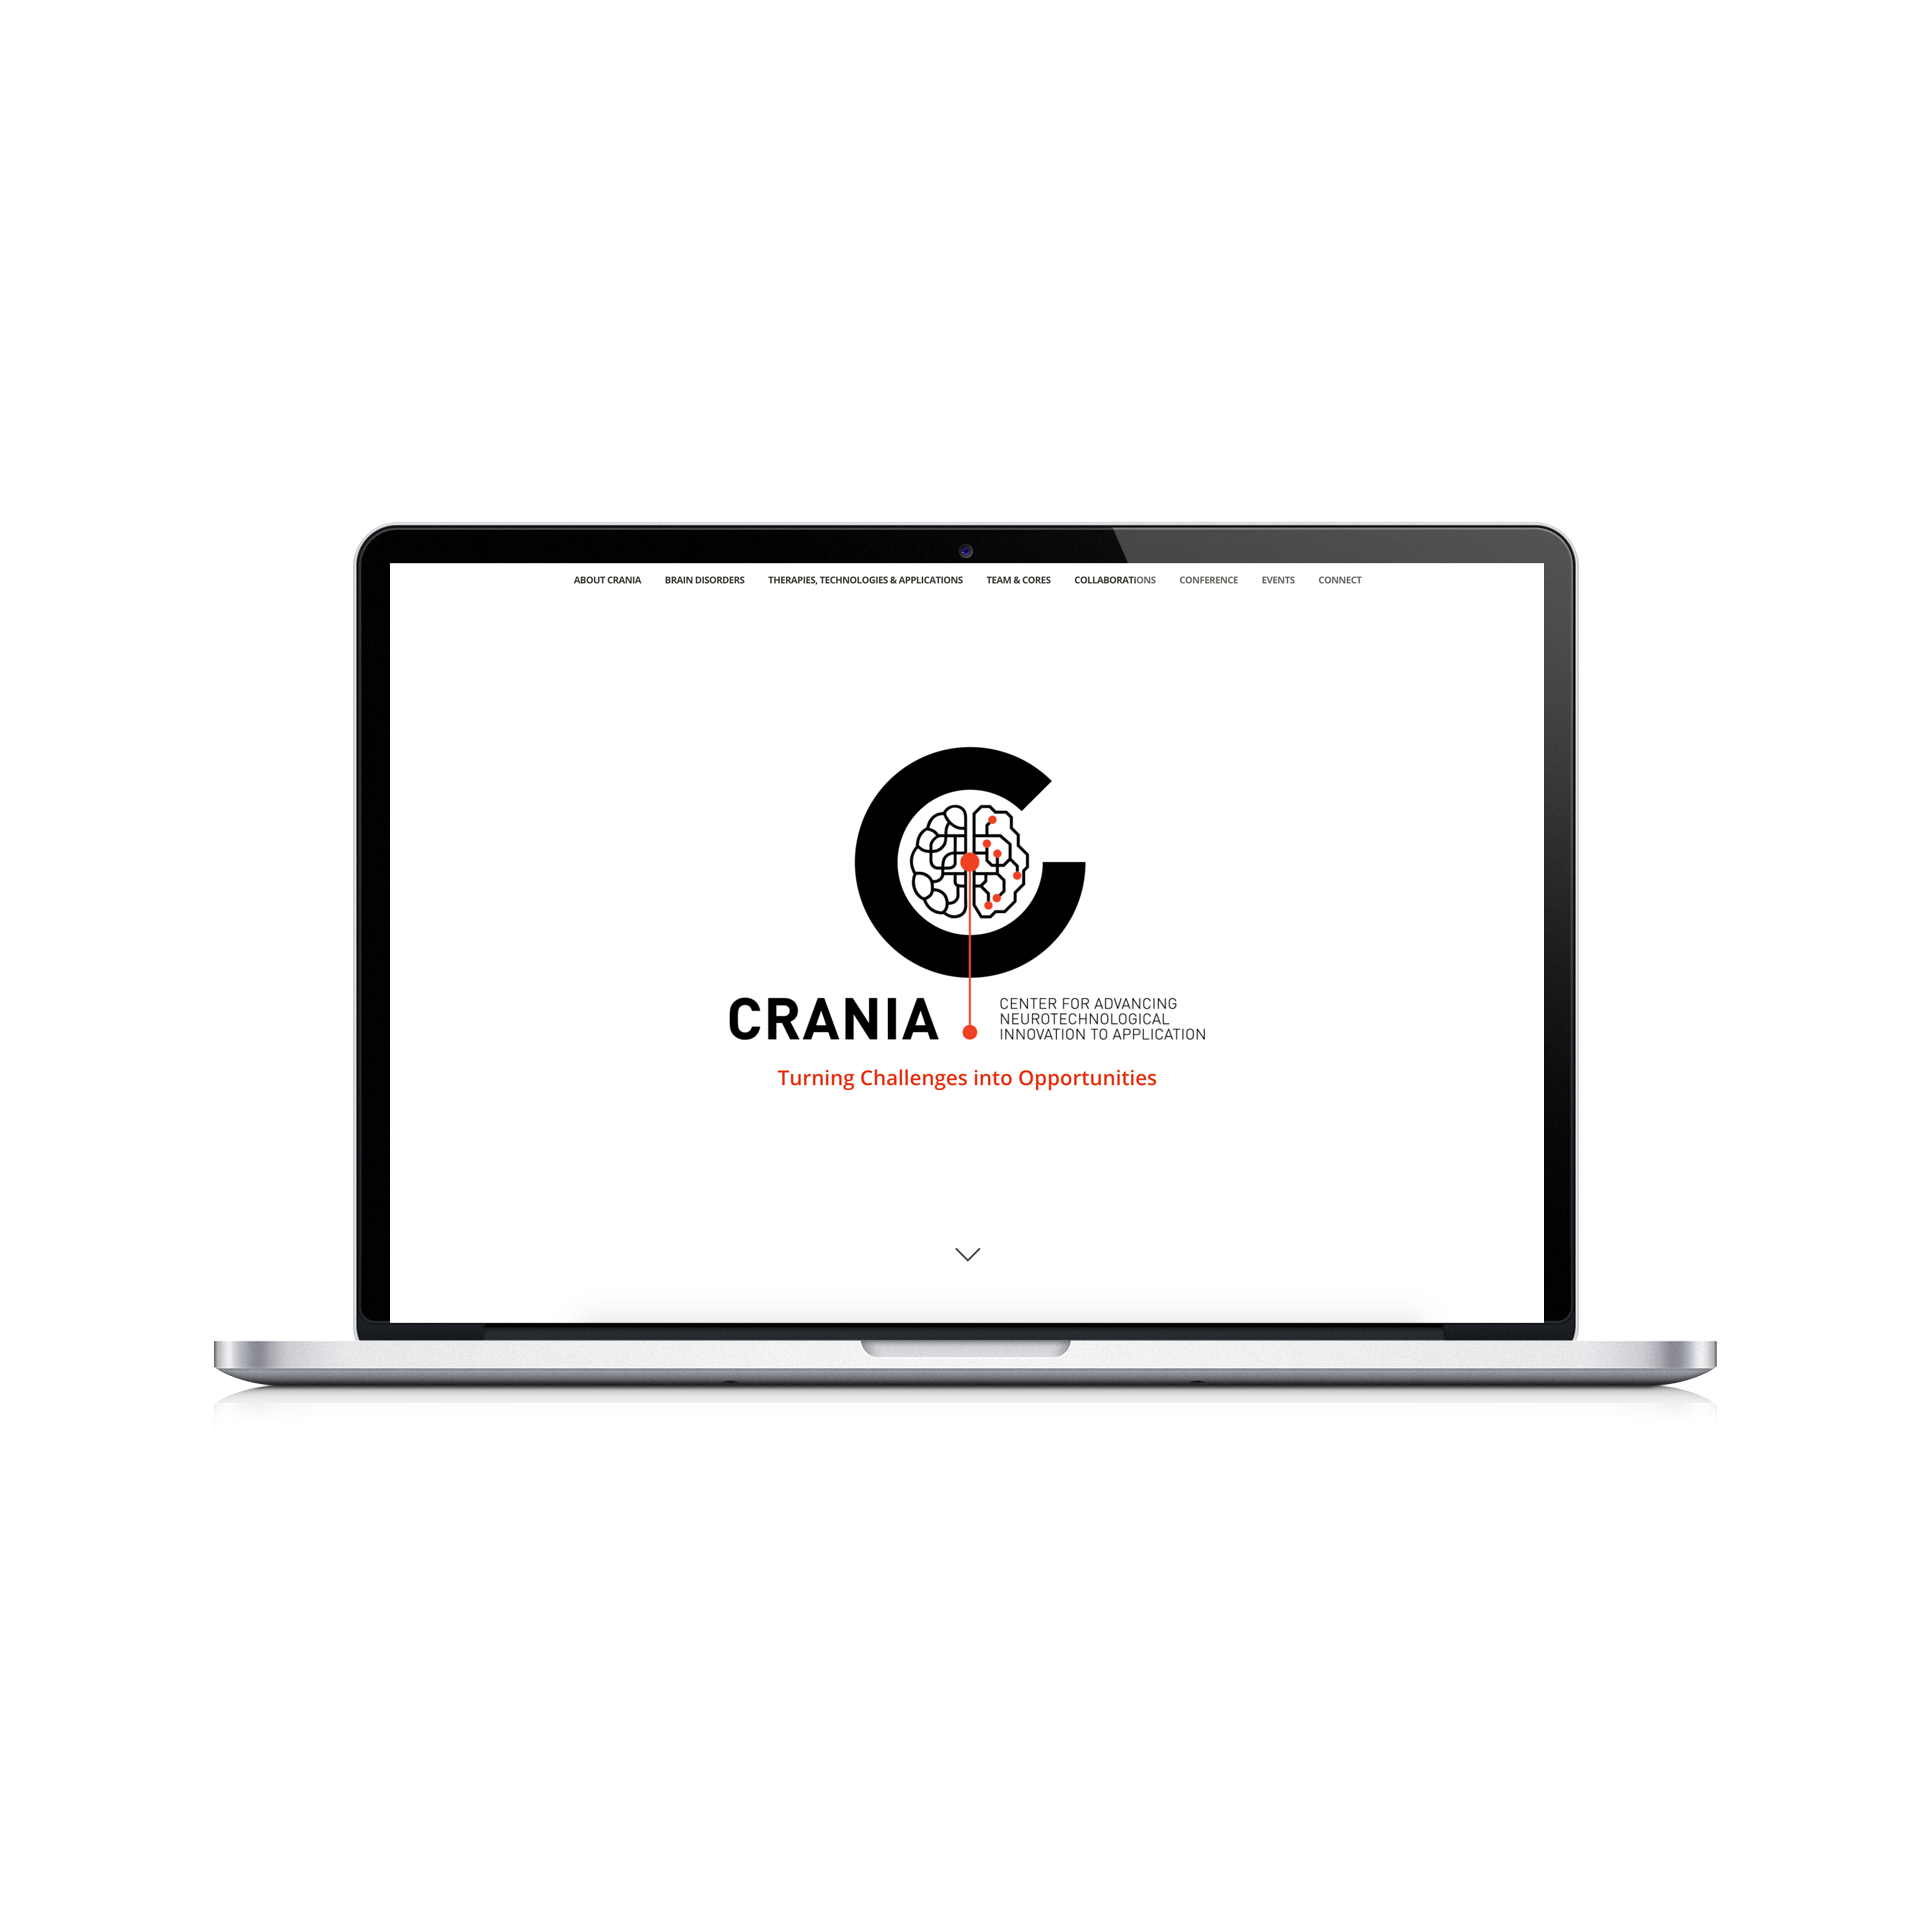 Image of Crania website on a fake computer